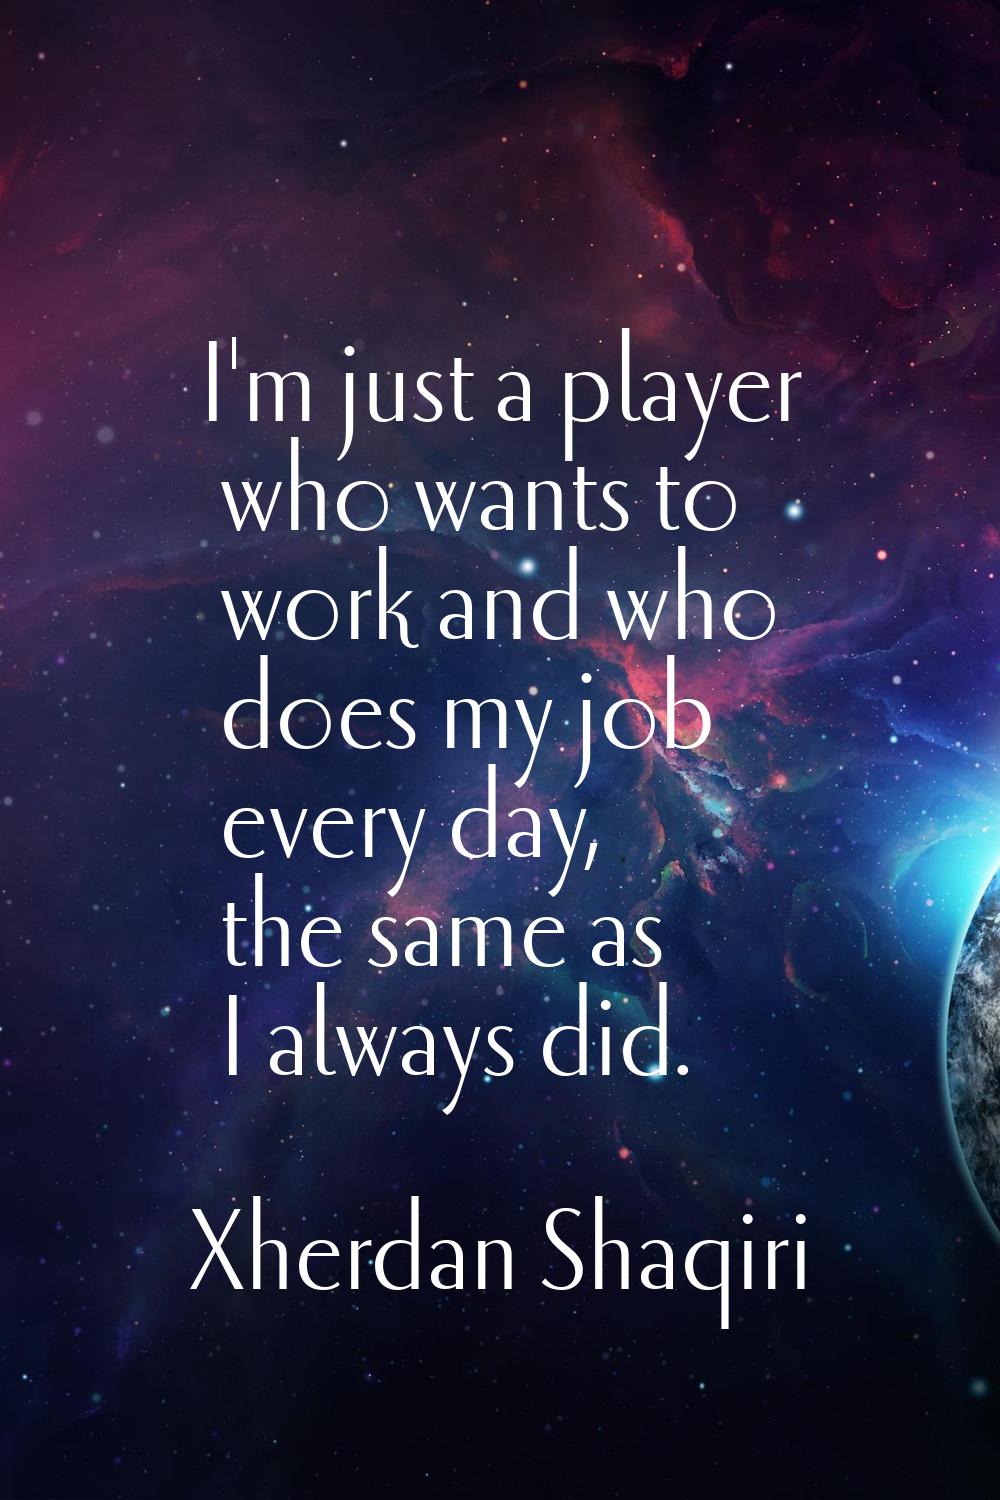 I'm just a player who wants to work and who does my job every day, the same as I always did.